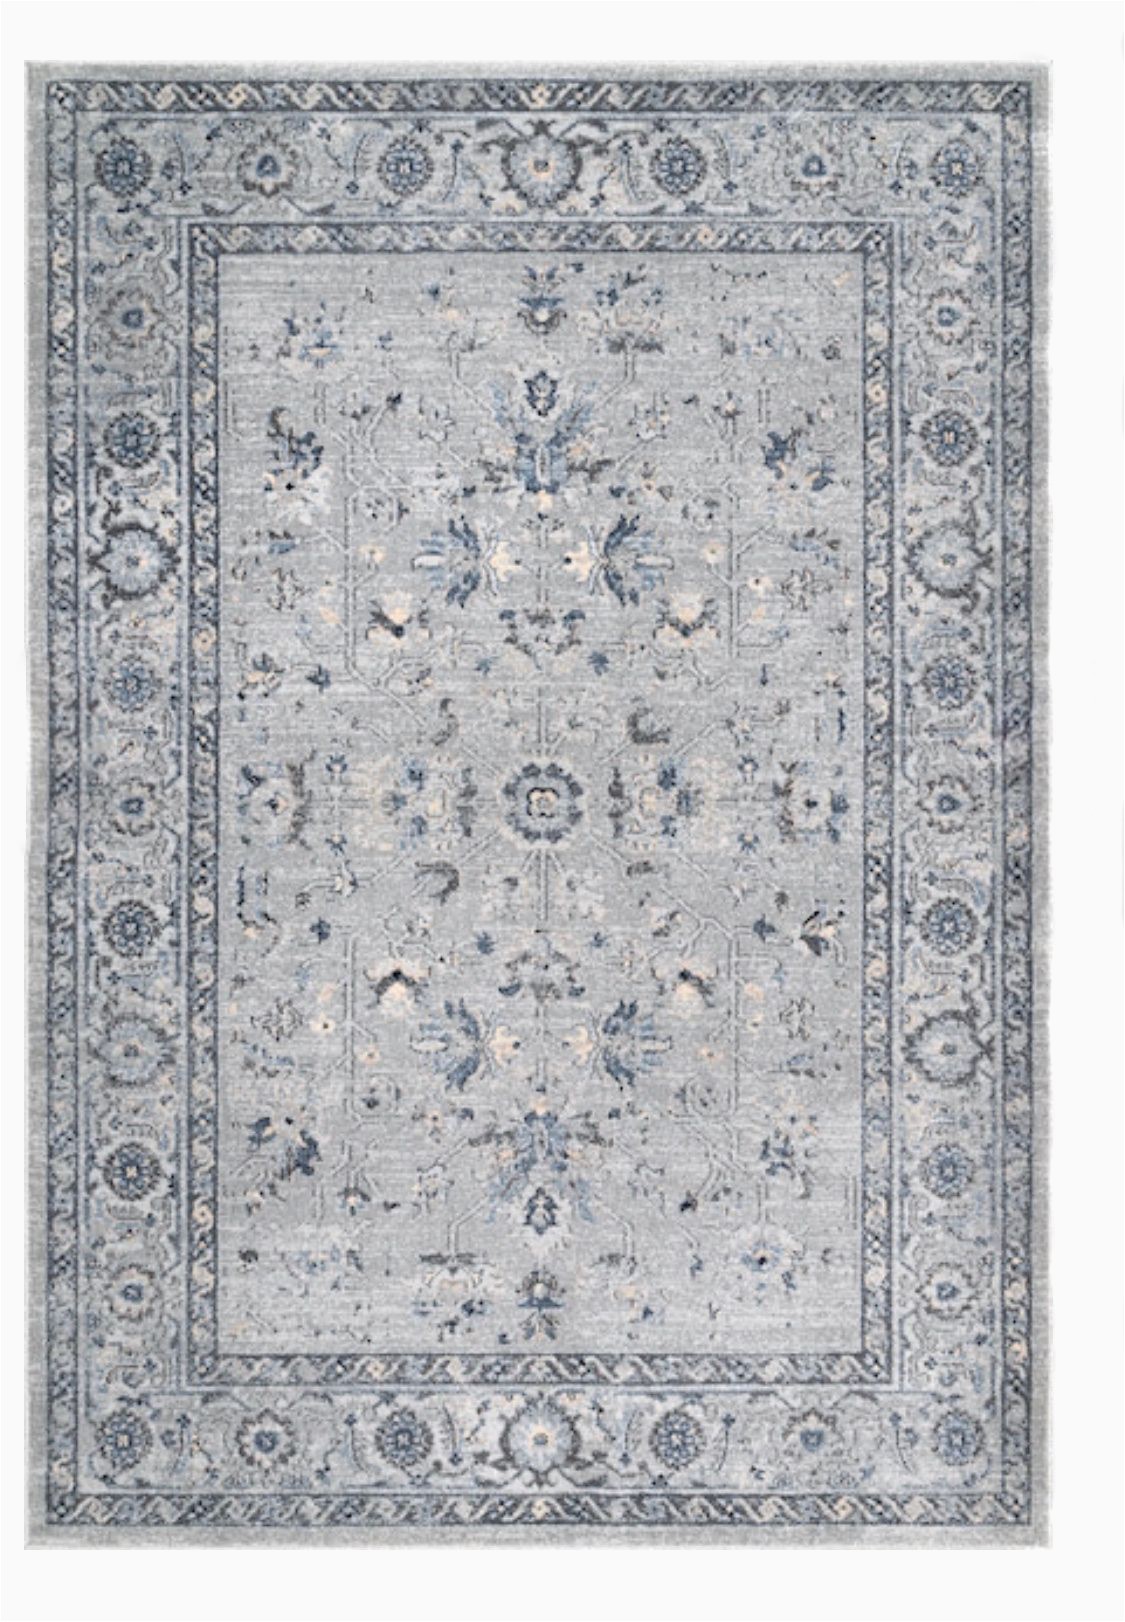 Sam S Club area Rugs 9×12 This Rug is Off today 5 Sizes From 9 X12 Down to 4 X 6